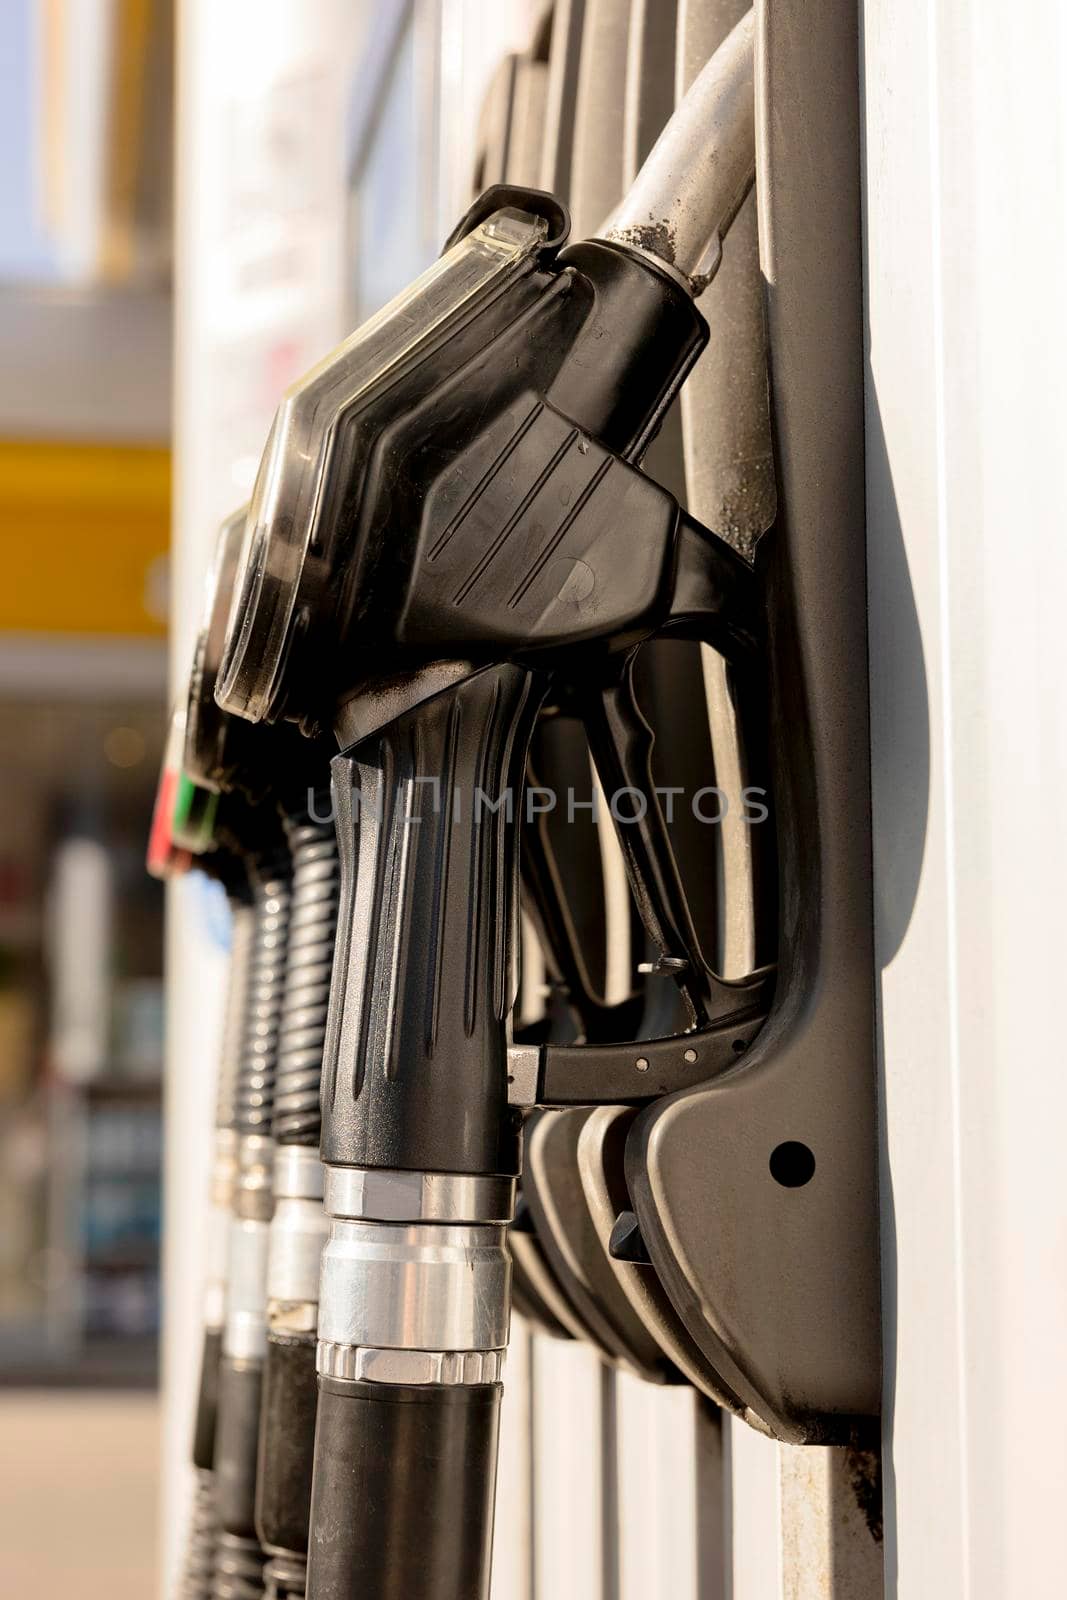 Fuel nozzles on the petrol station. Close up view. Fuel, gasoline, diesel is getting more expensive. Petrol industry and service. Petrol price and oil crisis concept